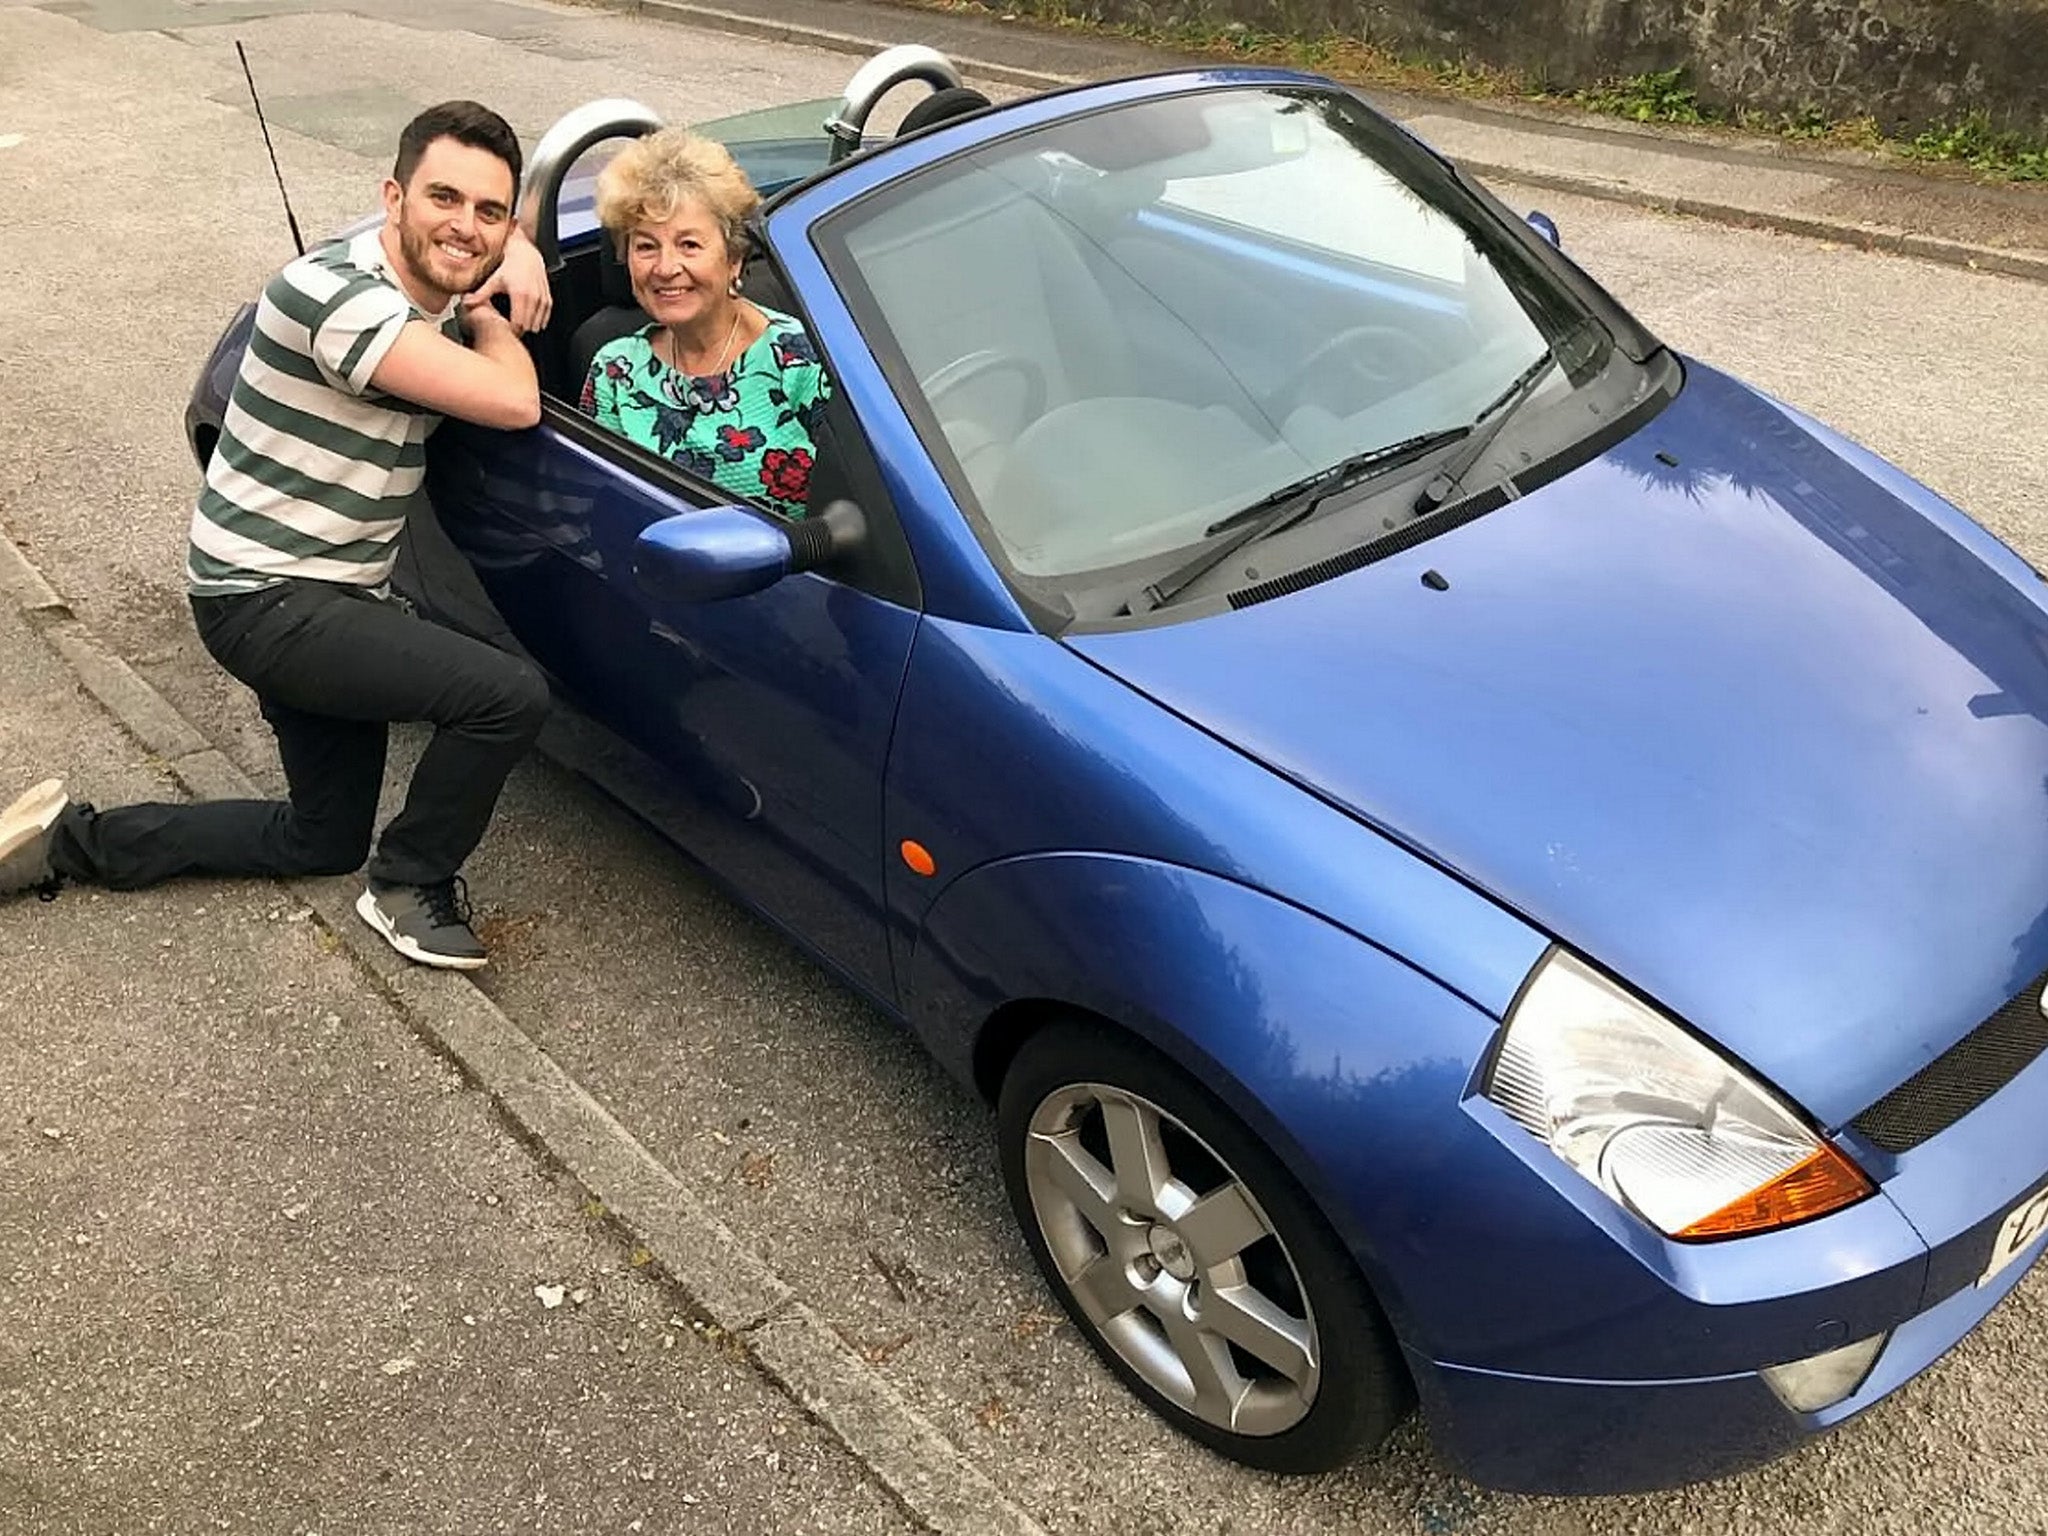 Ross Rothero-Bourge bought his mother Lynette Rothero a new Ford StreetKa after she supported his music career